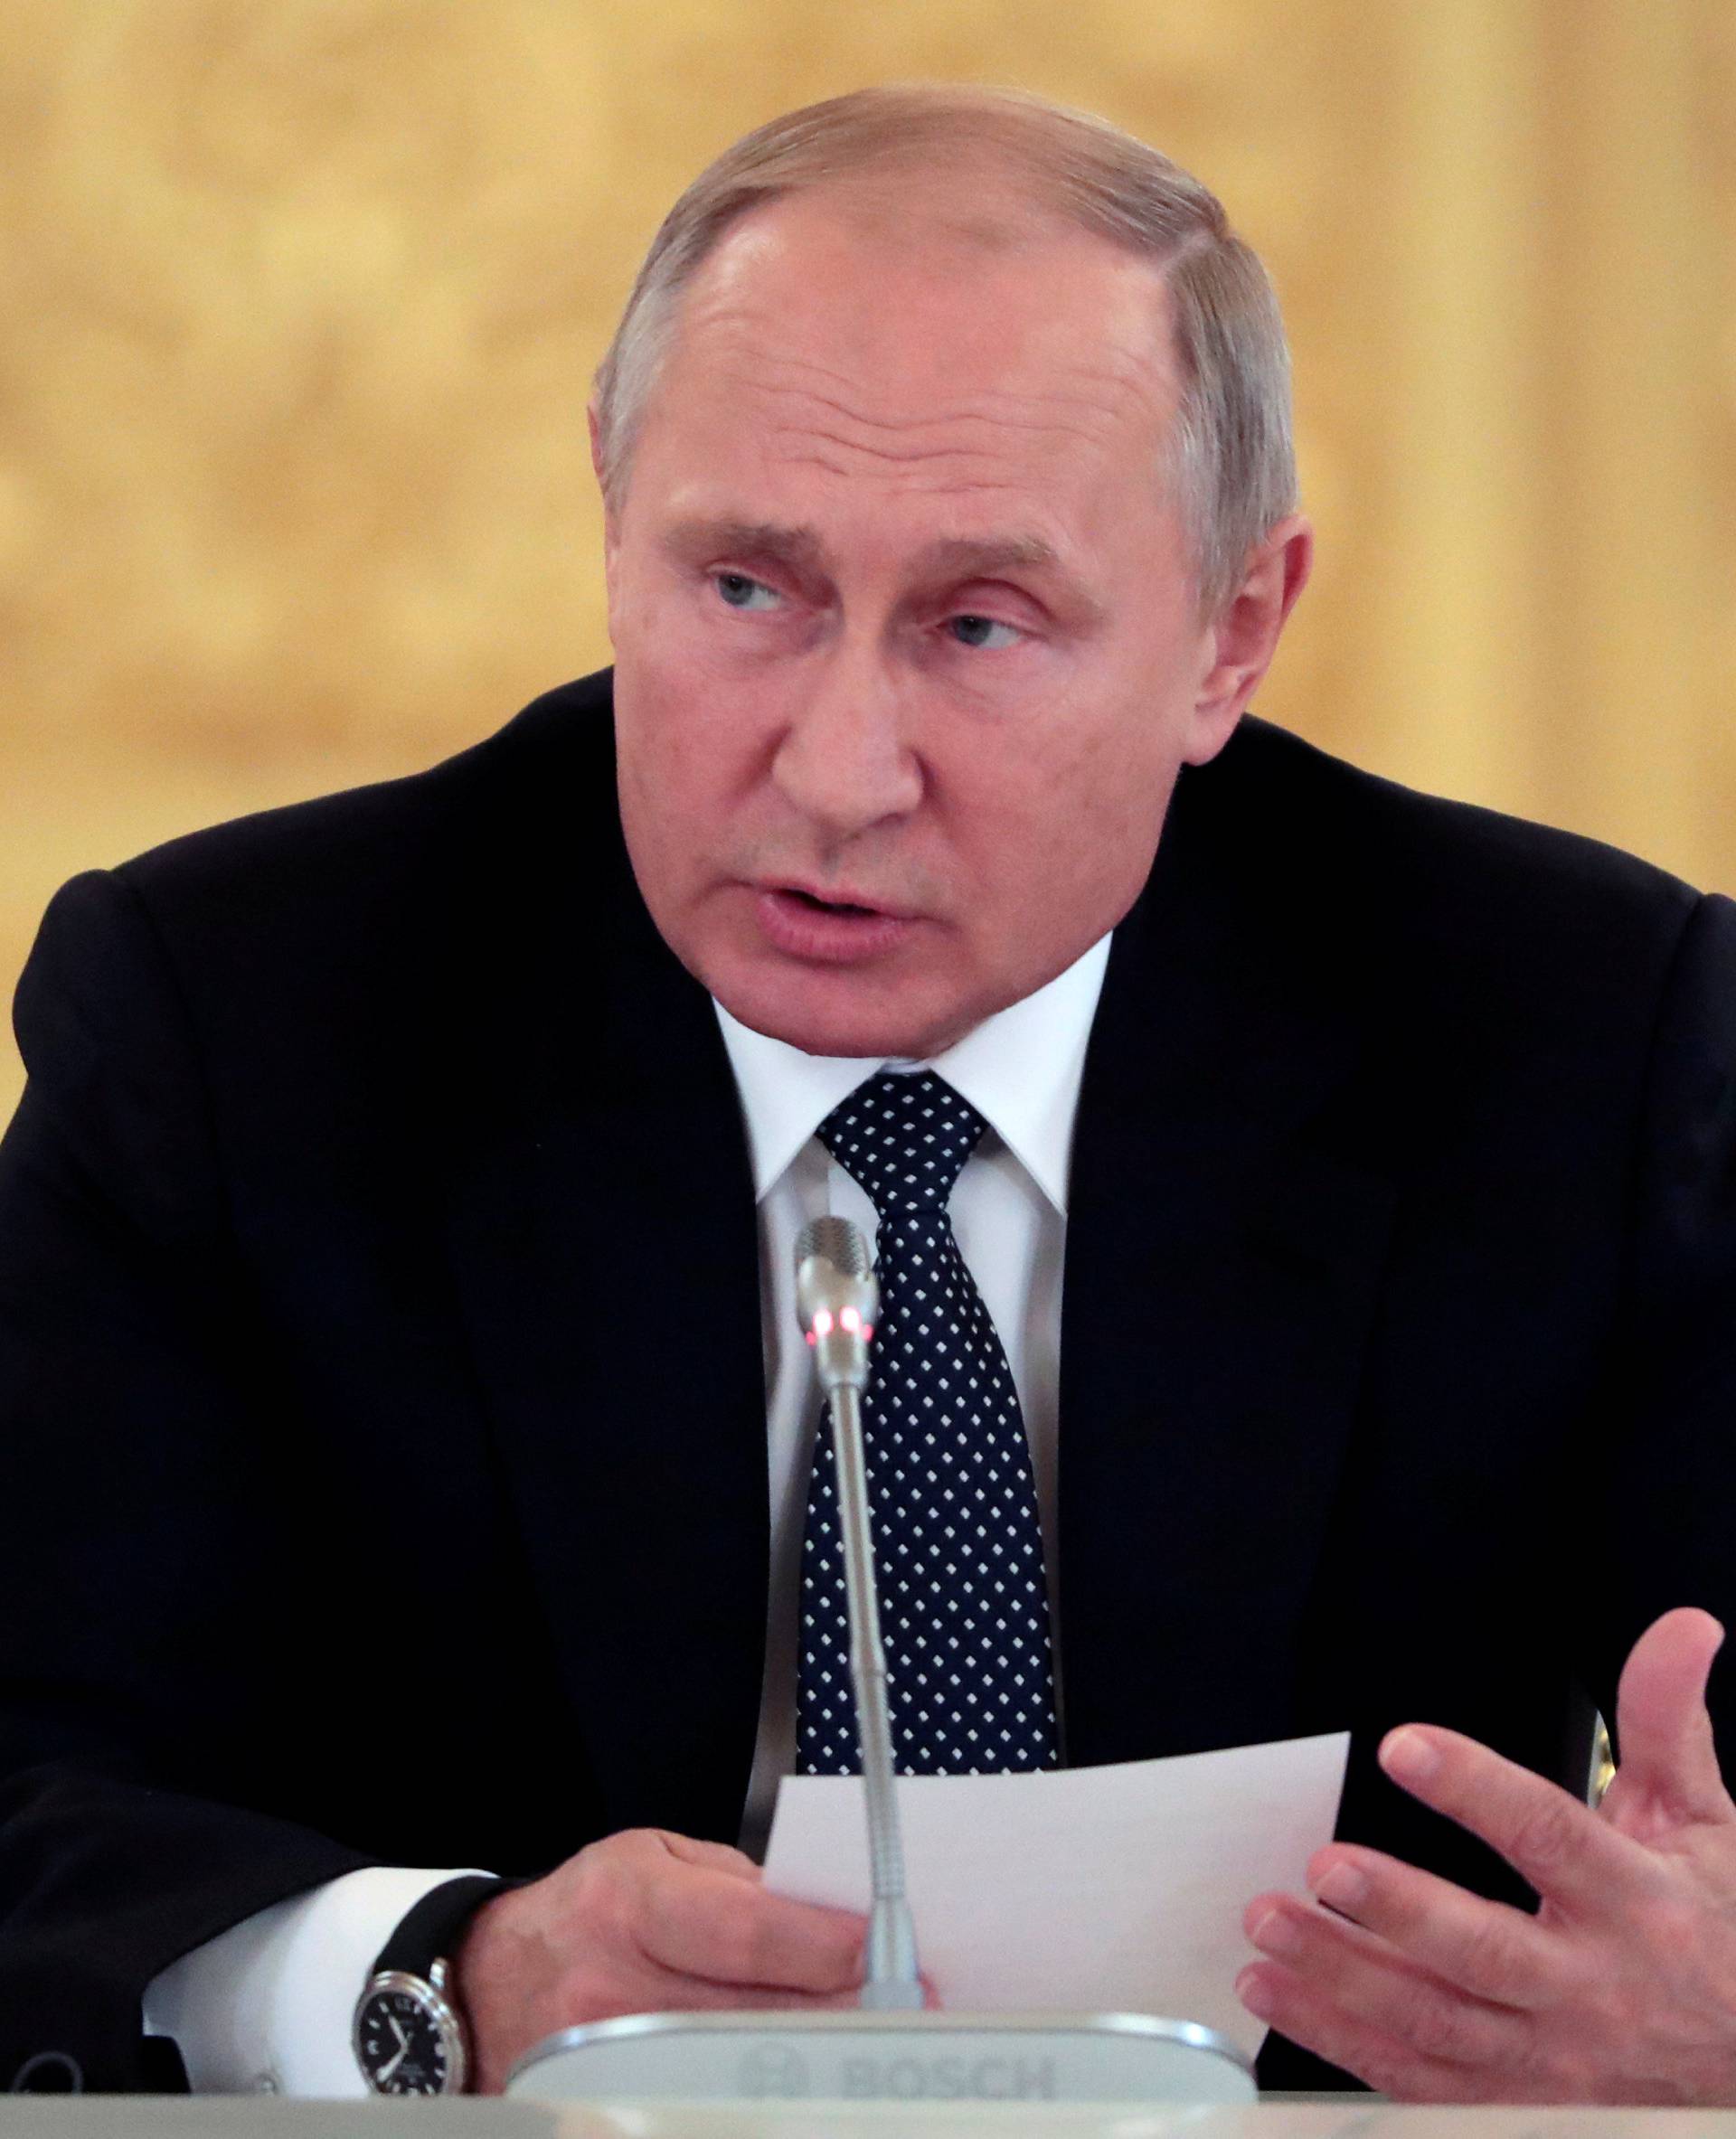 Russian President Putin speaks during a meeting with Italian businessmen in Moscow